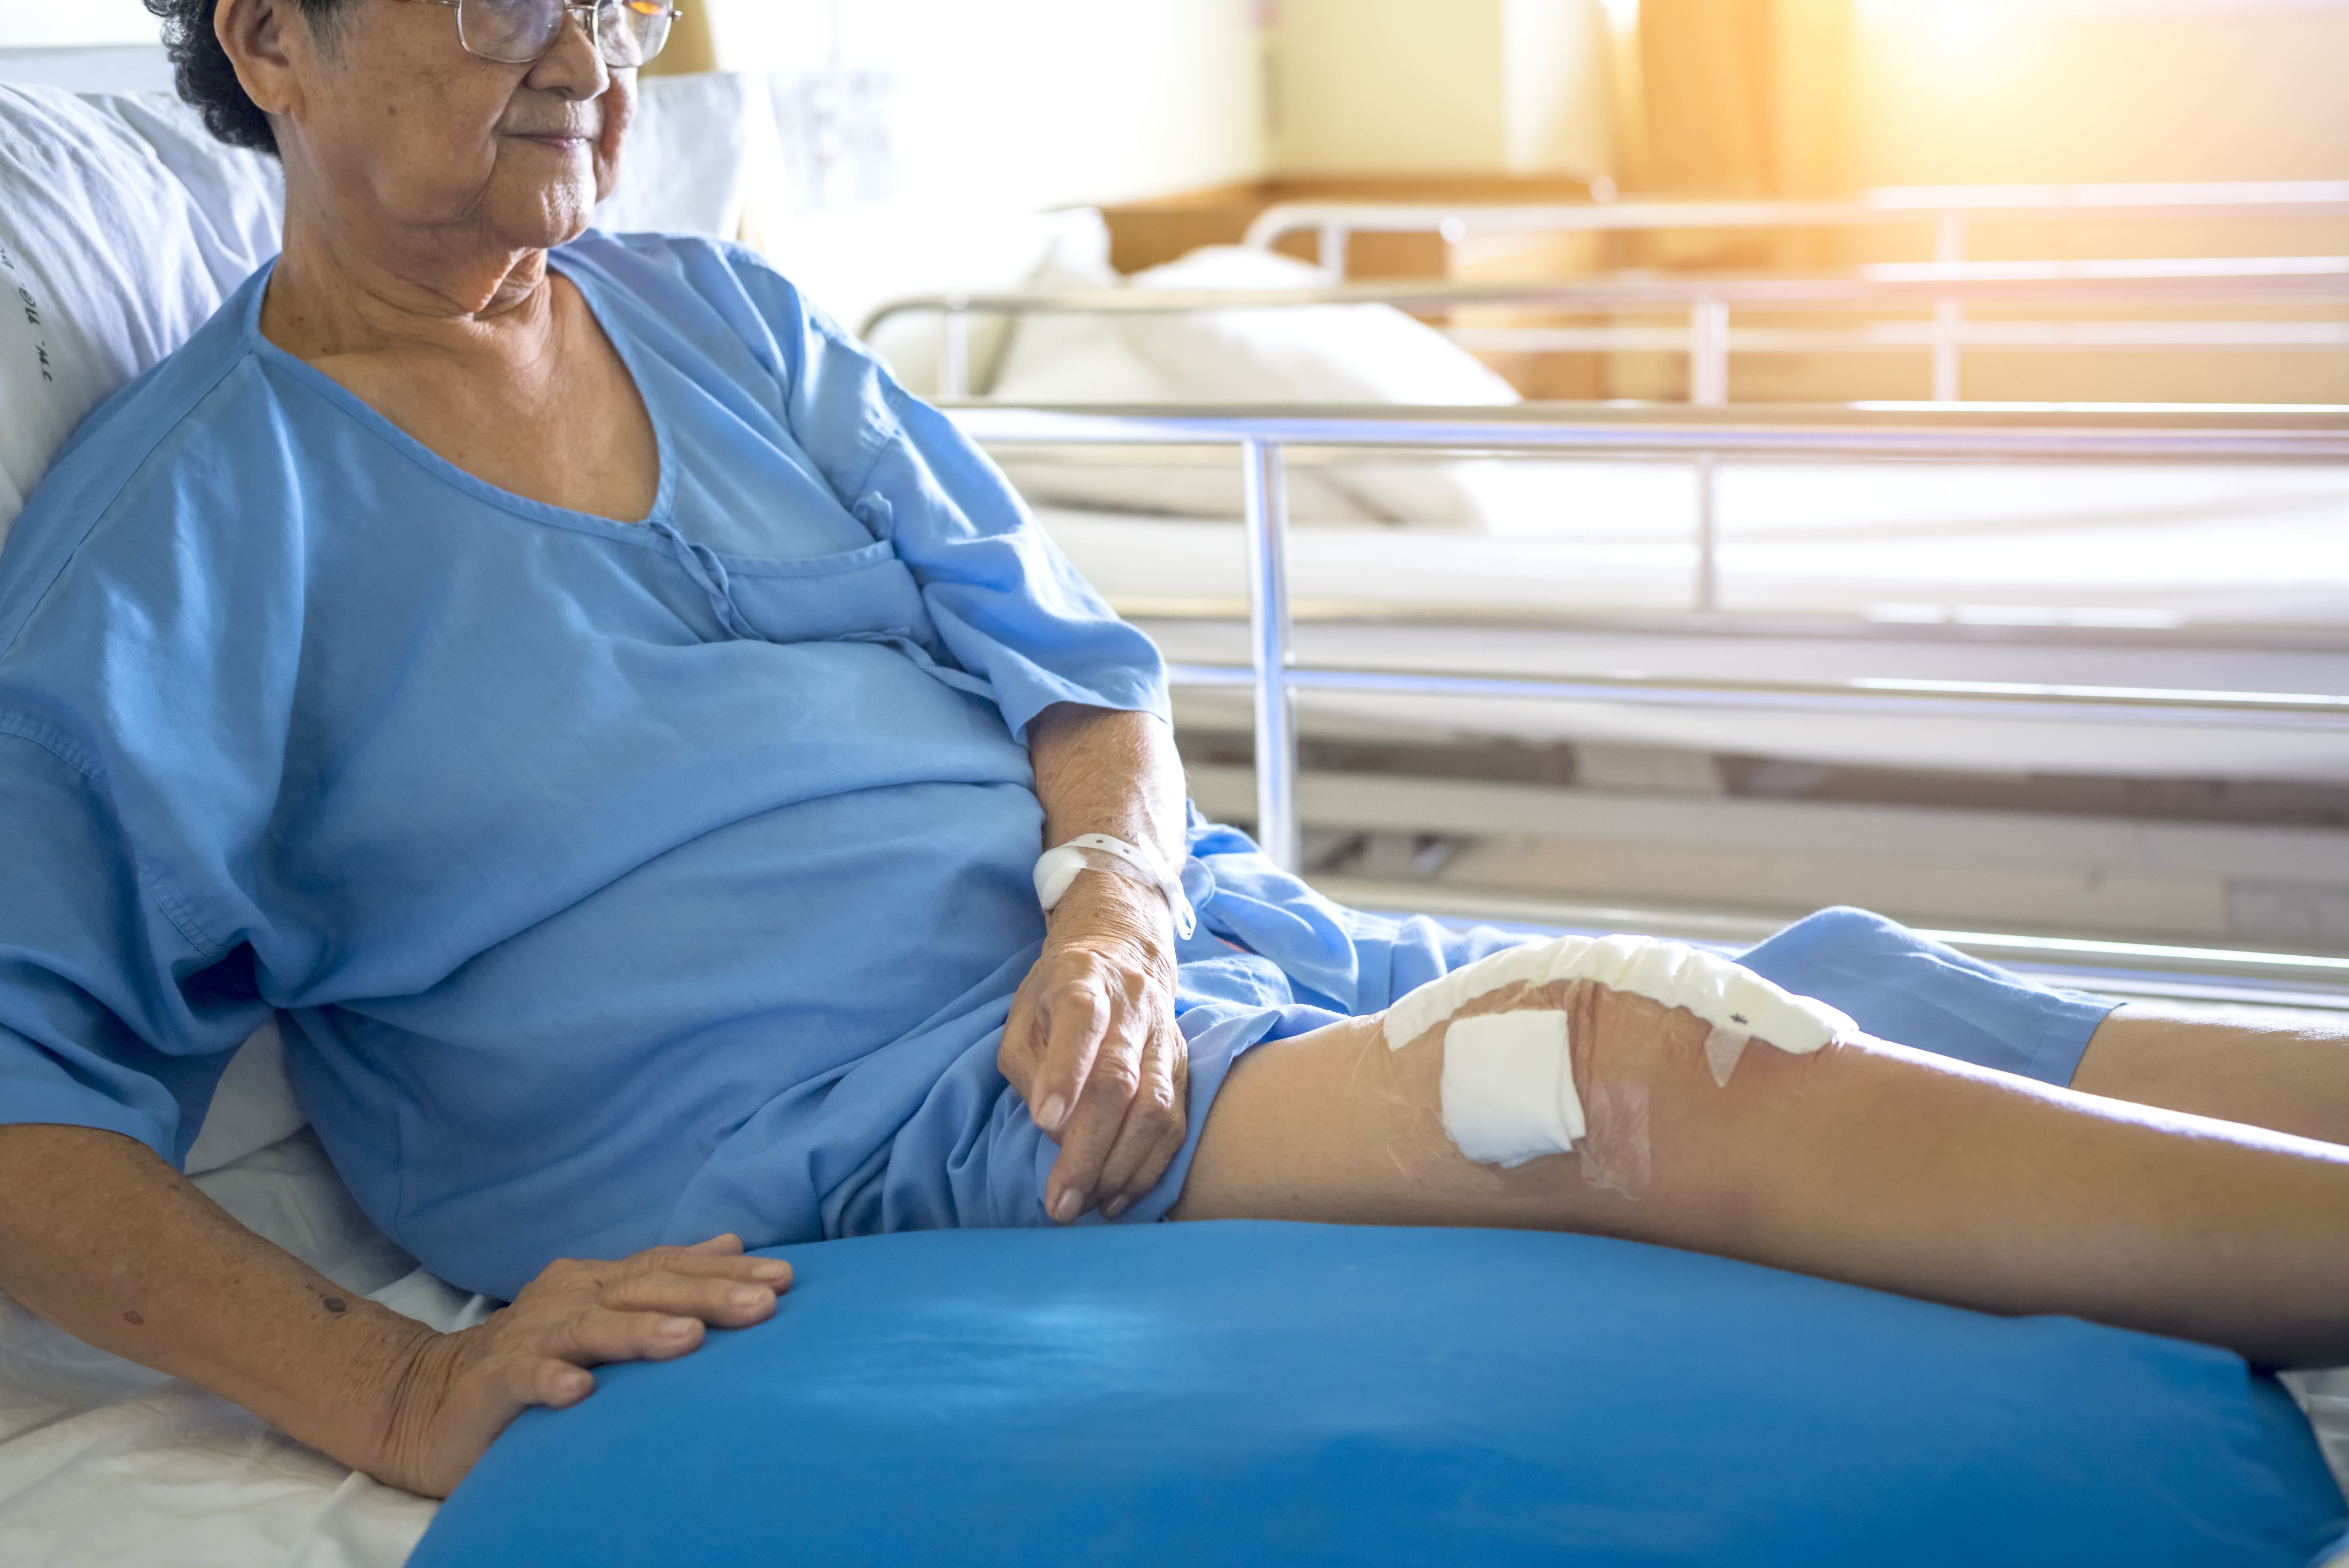 Musculoskeletal Disease May Follow a Total Knee Replacement. 